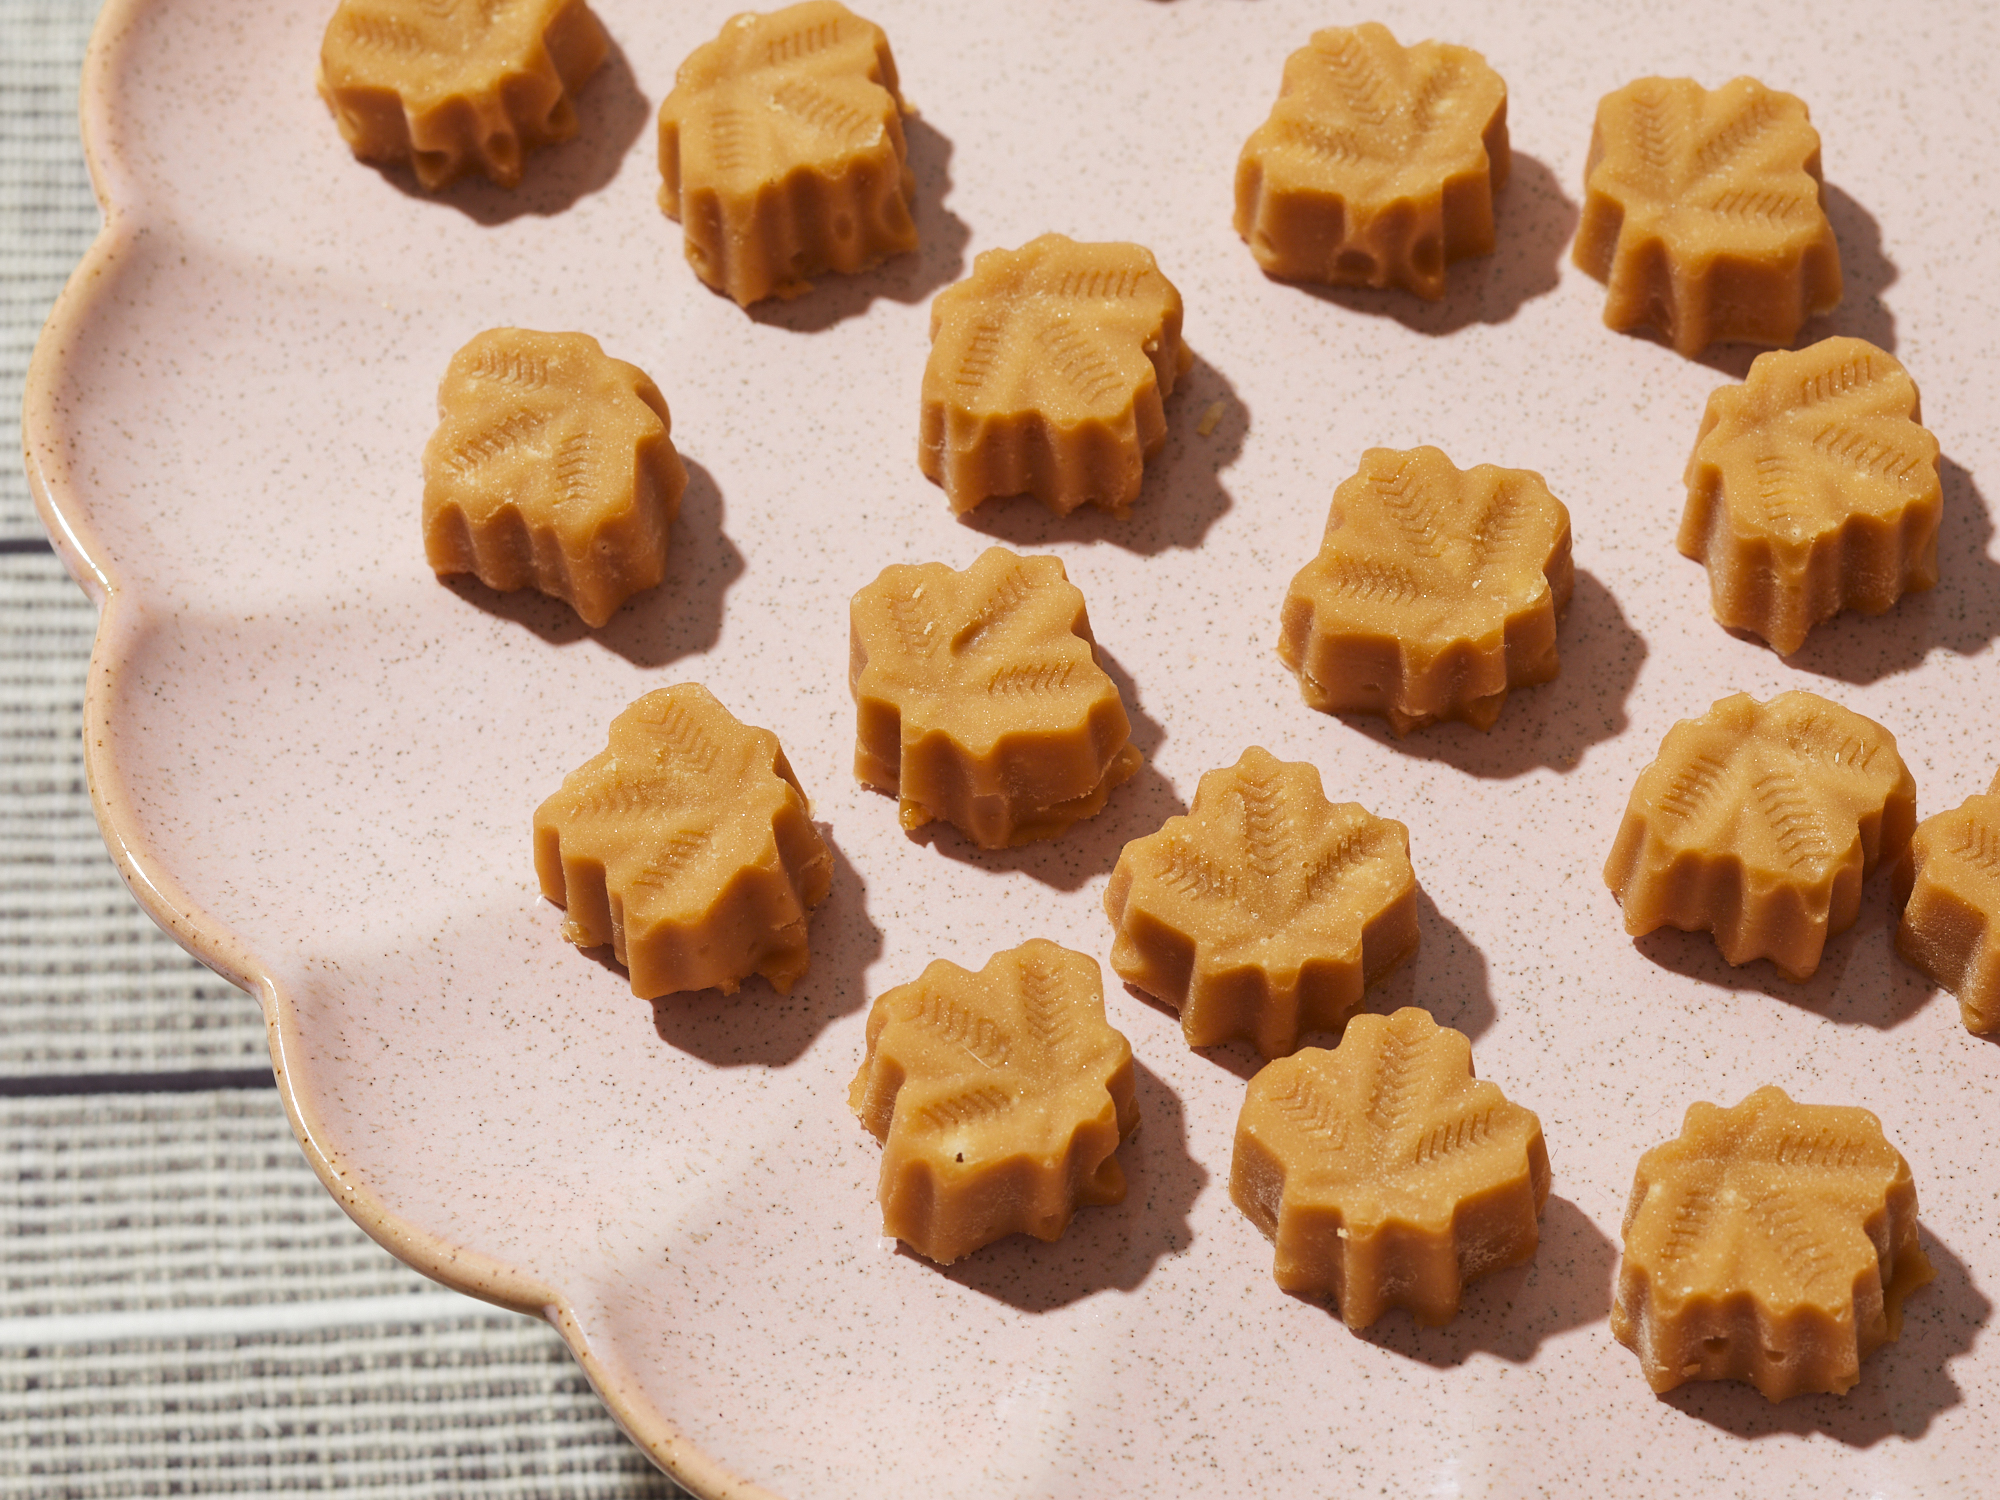 high angle looking at a plate of maple candies